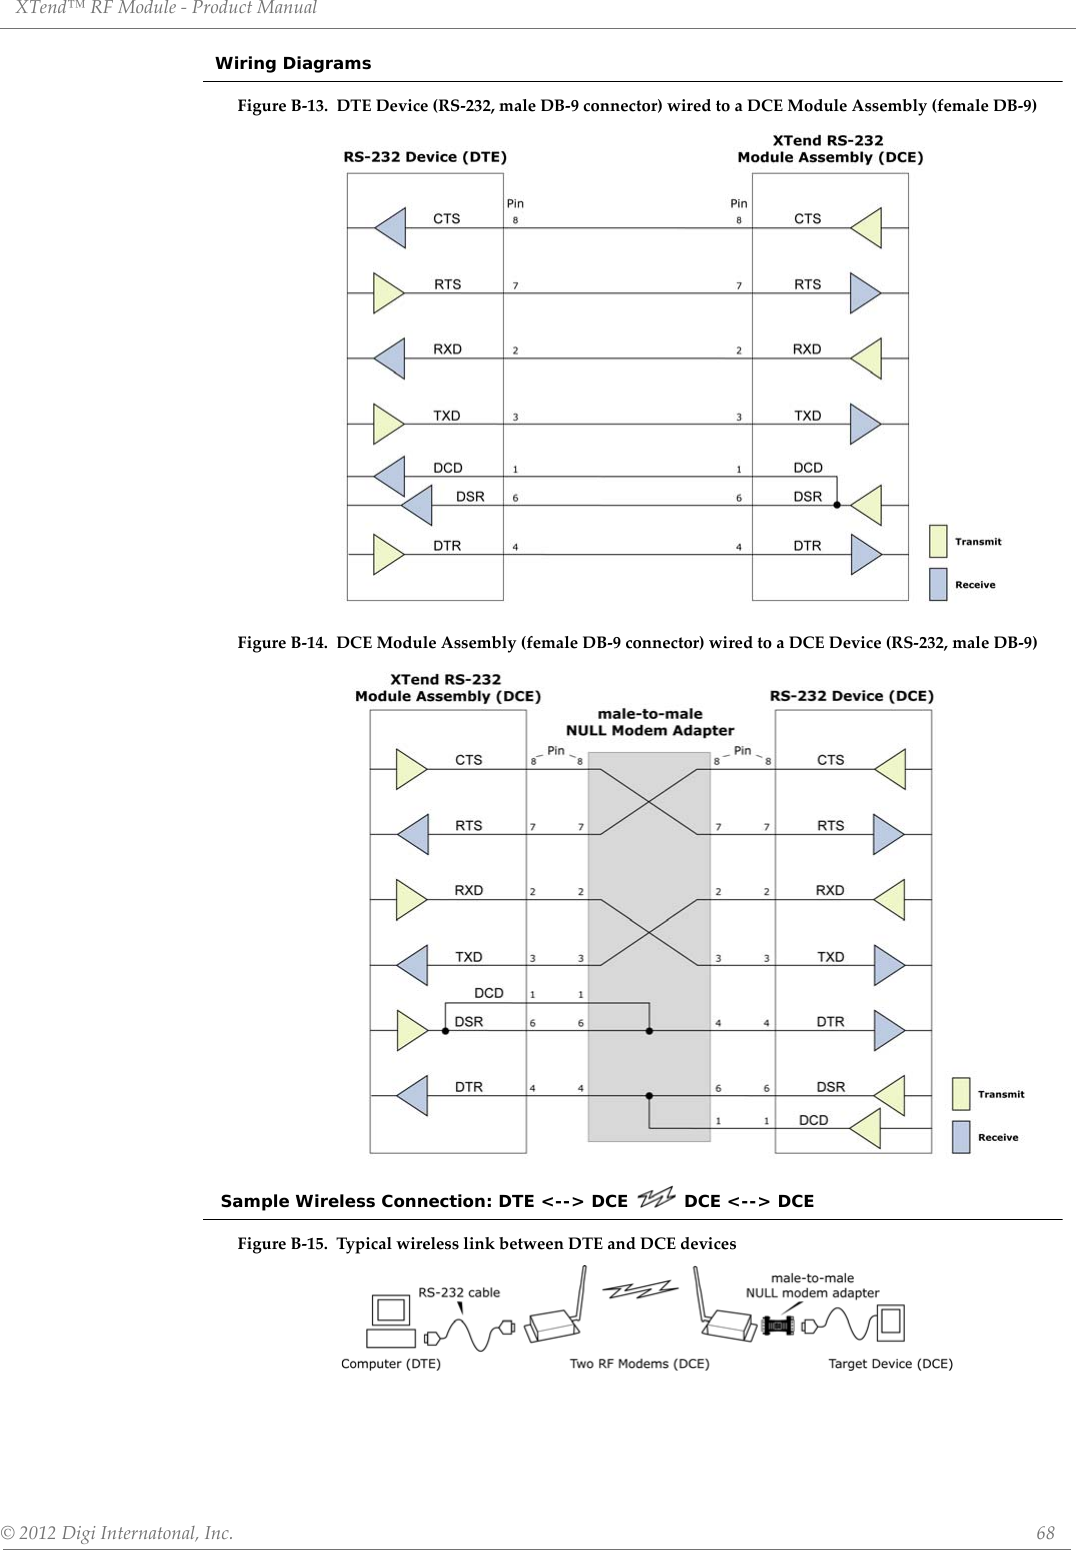 XTend™ RF Module - Product Manual © 2012 Digi Internatonal, Inc.      68Wiring DiagramsFigure B-13.  DTE Device (RS-232, male DB-9 connector) wired to a DCE Module Assembly (female DB-9)  Figure B-14.  DCE Module Assembly (female DB-9 connector) wired to a DCE Device (RS-232, male DB-9)   Sample Wireless Connection: DTE &lt;--&gt; DCE   DCE &lt;--&gt; DCEFigure B-15.  Typical wireless link between DTE and DCE devices